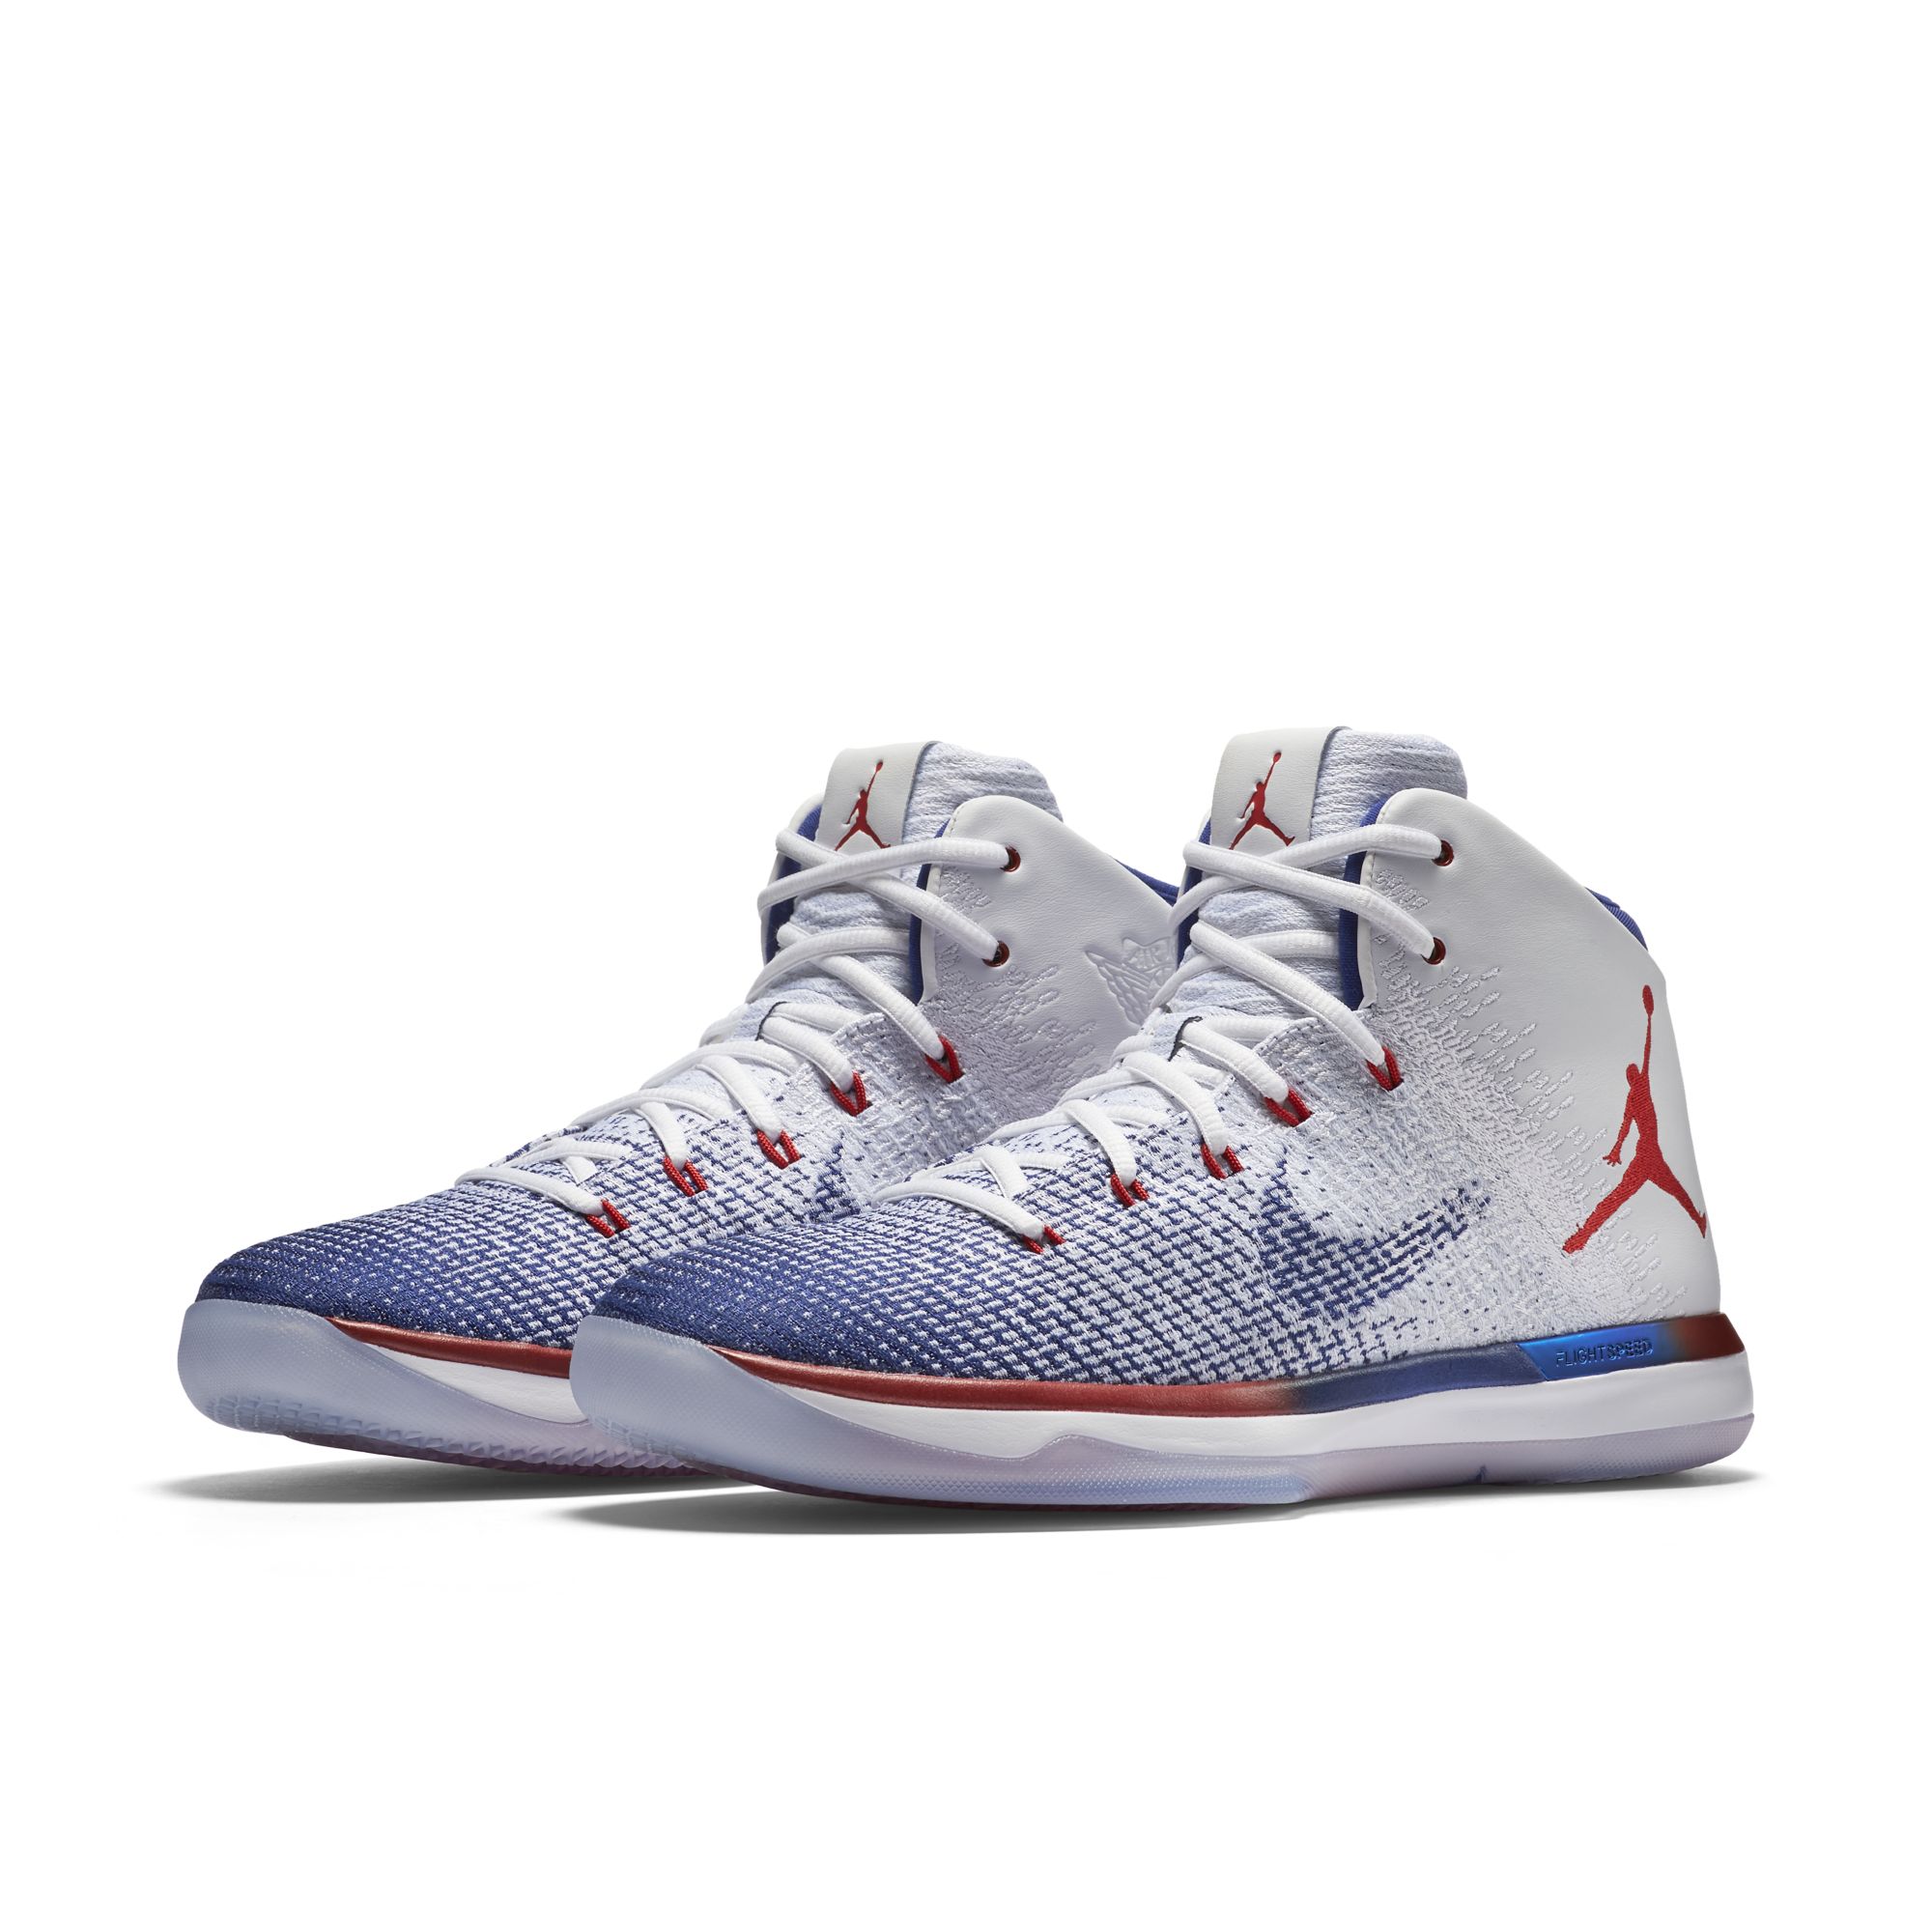 Colector Movimiento Modales The Air Jordan XXXI 'USA' is Set to Release - WearTesters